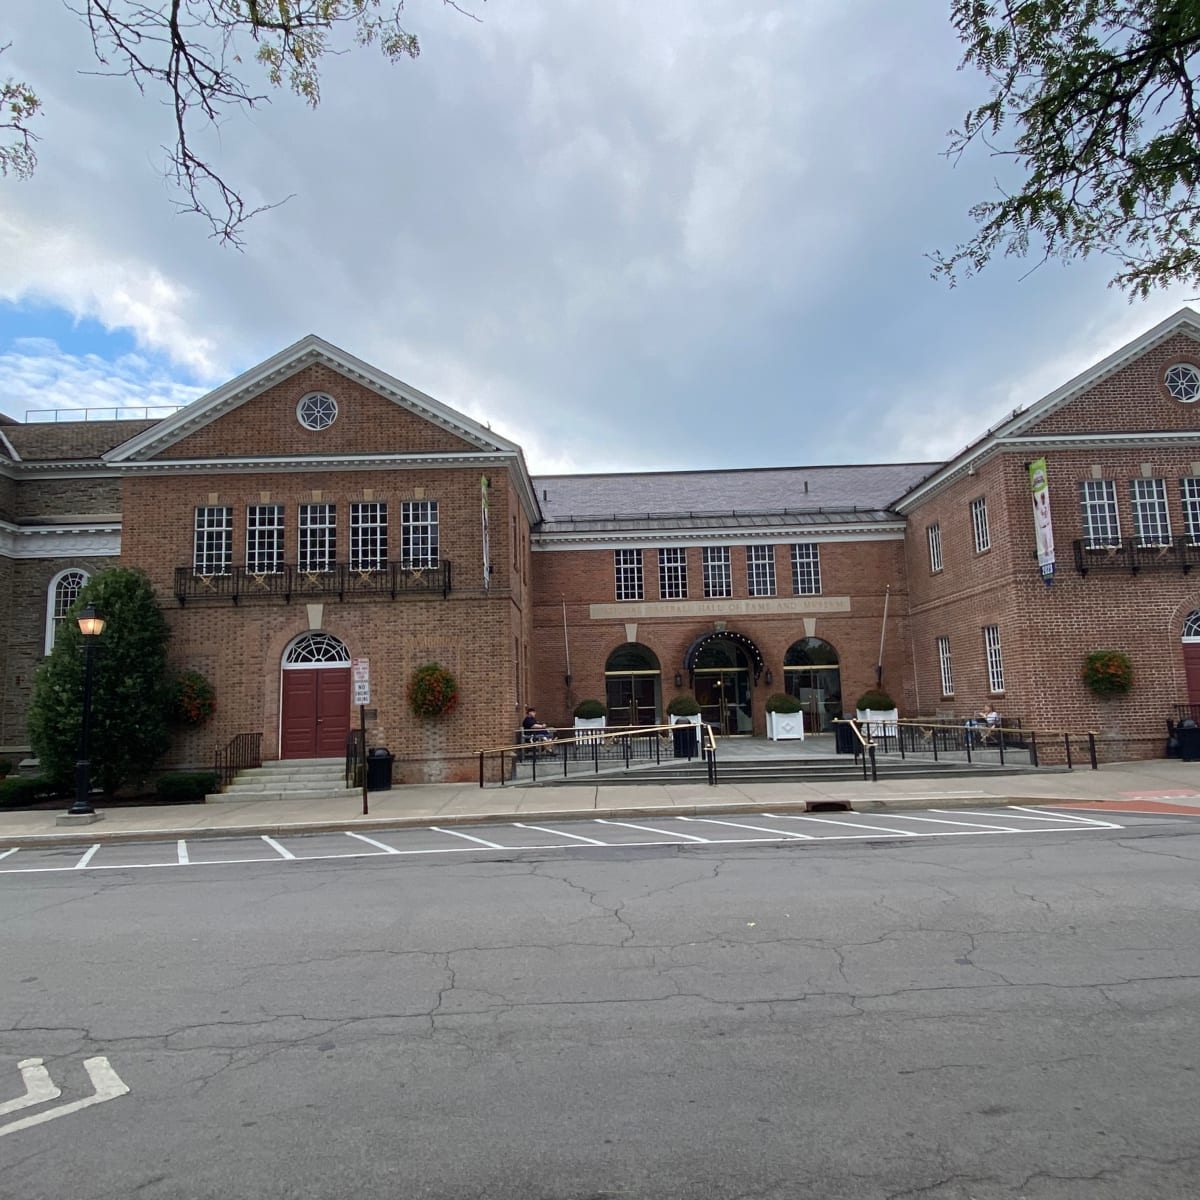 Home Base: The National Baseball Hall of Fame and Museum - Great